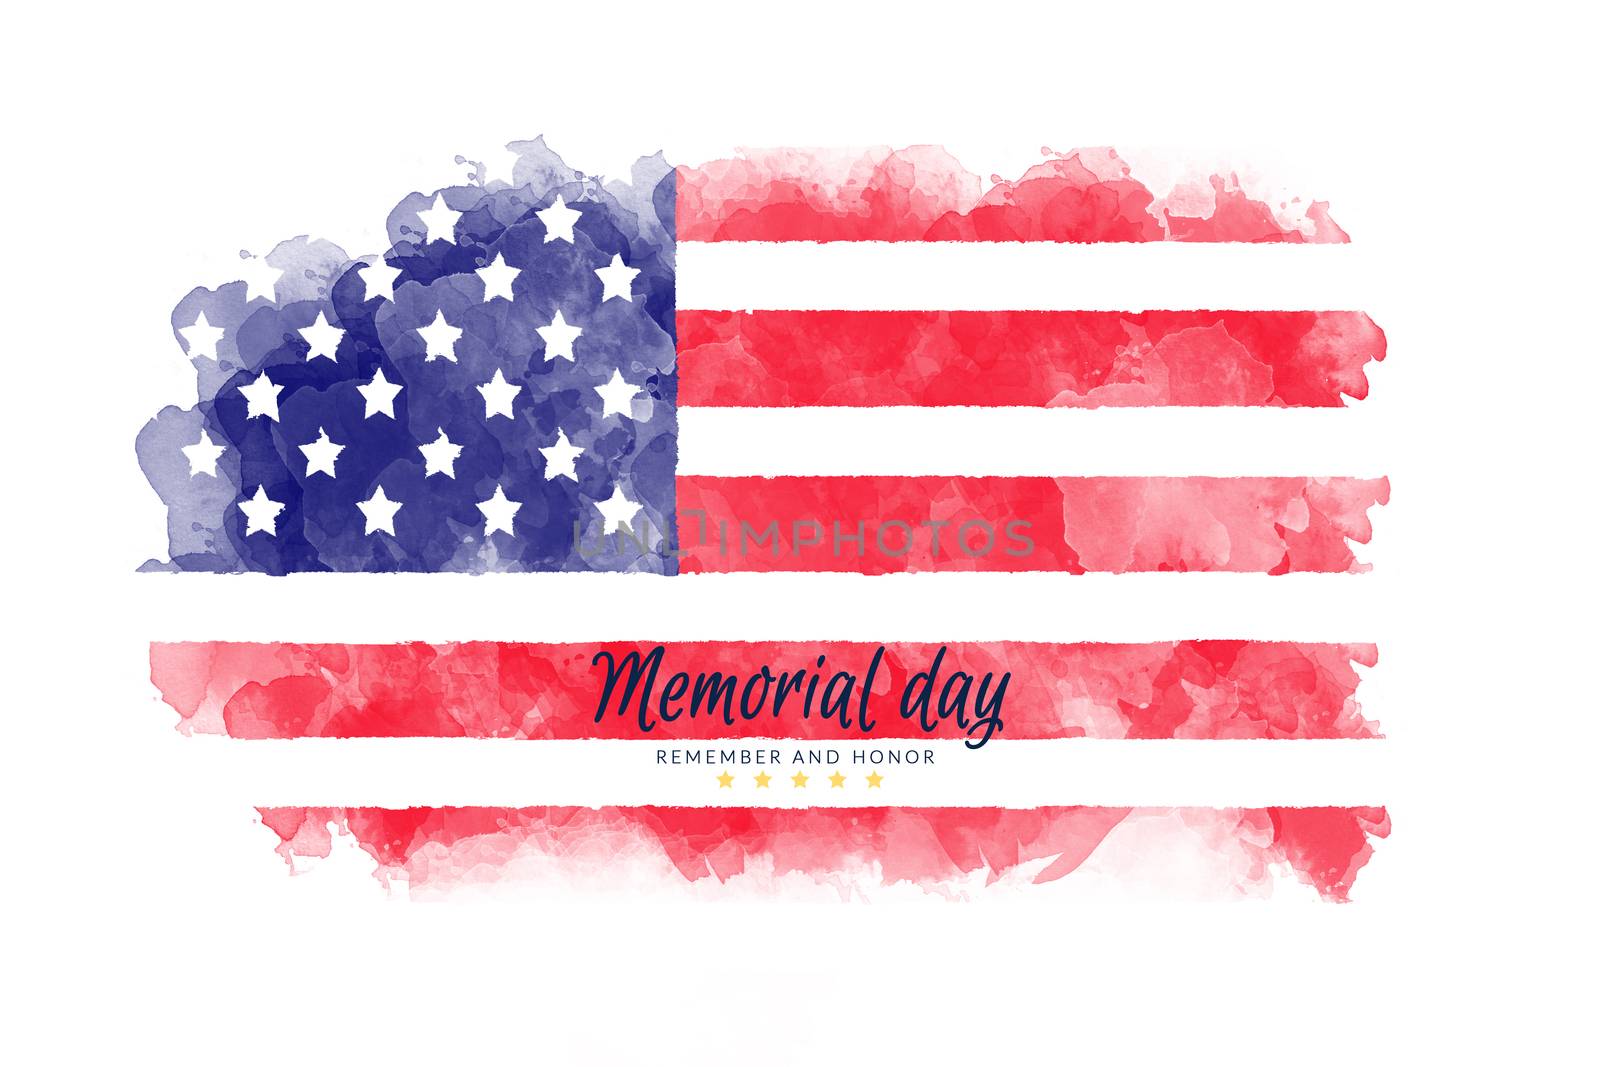 Memorial Day background illustration. text Memorial Day, remember and honor with America flag watercolor painting isolated on white background, vintage grunge style